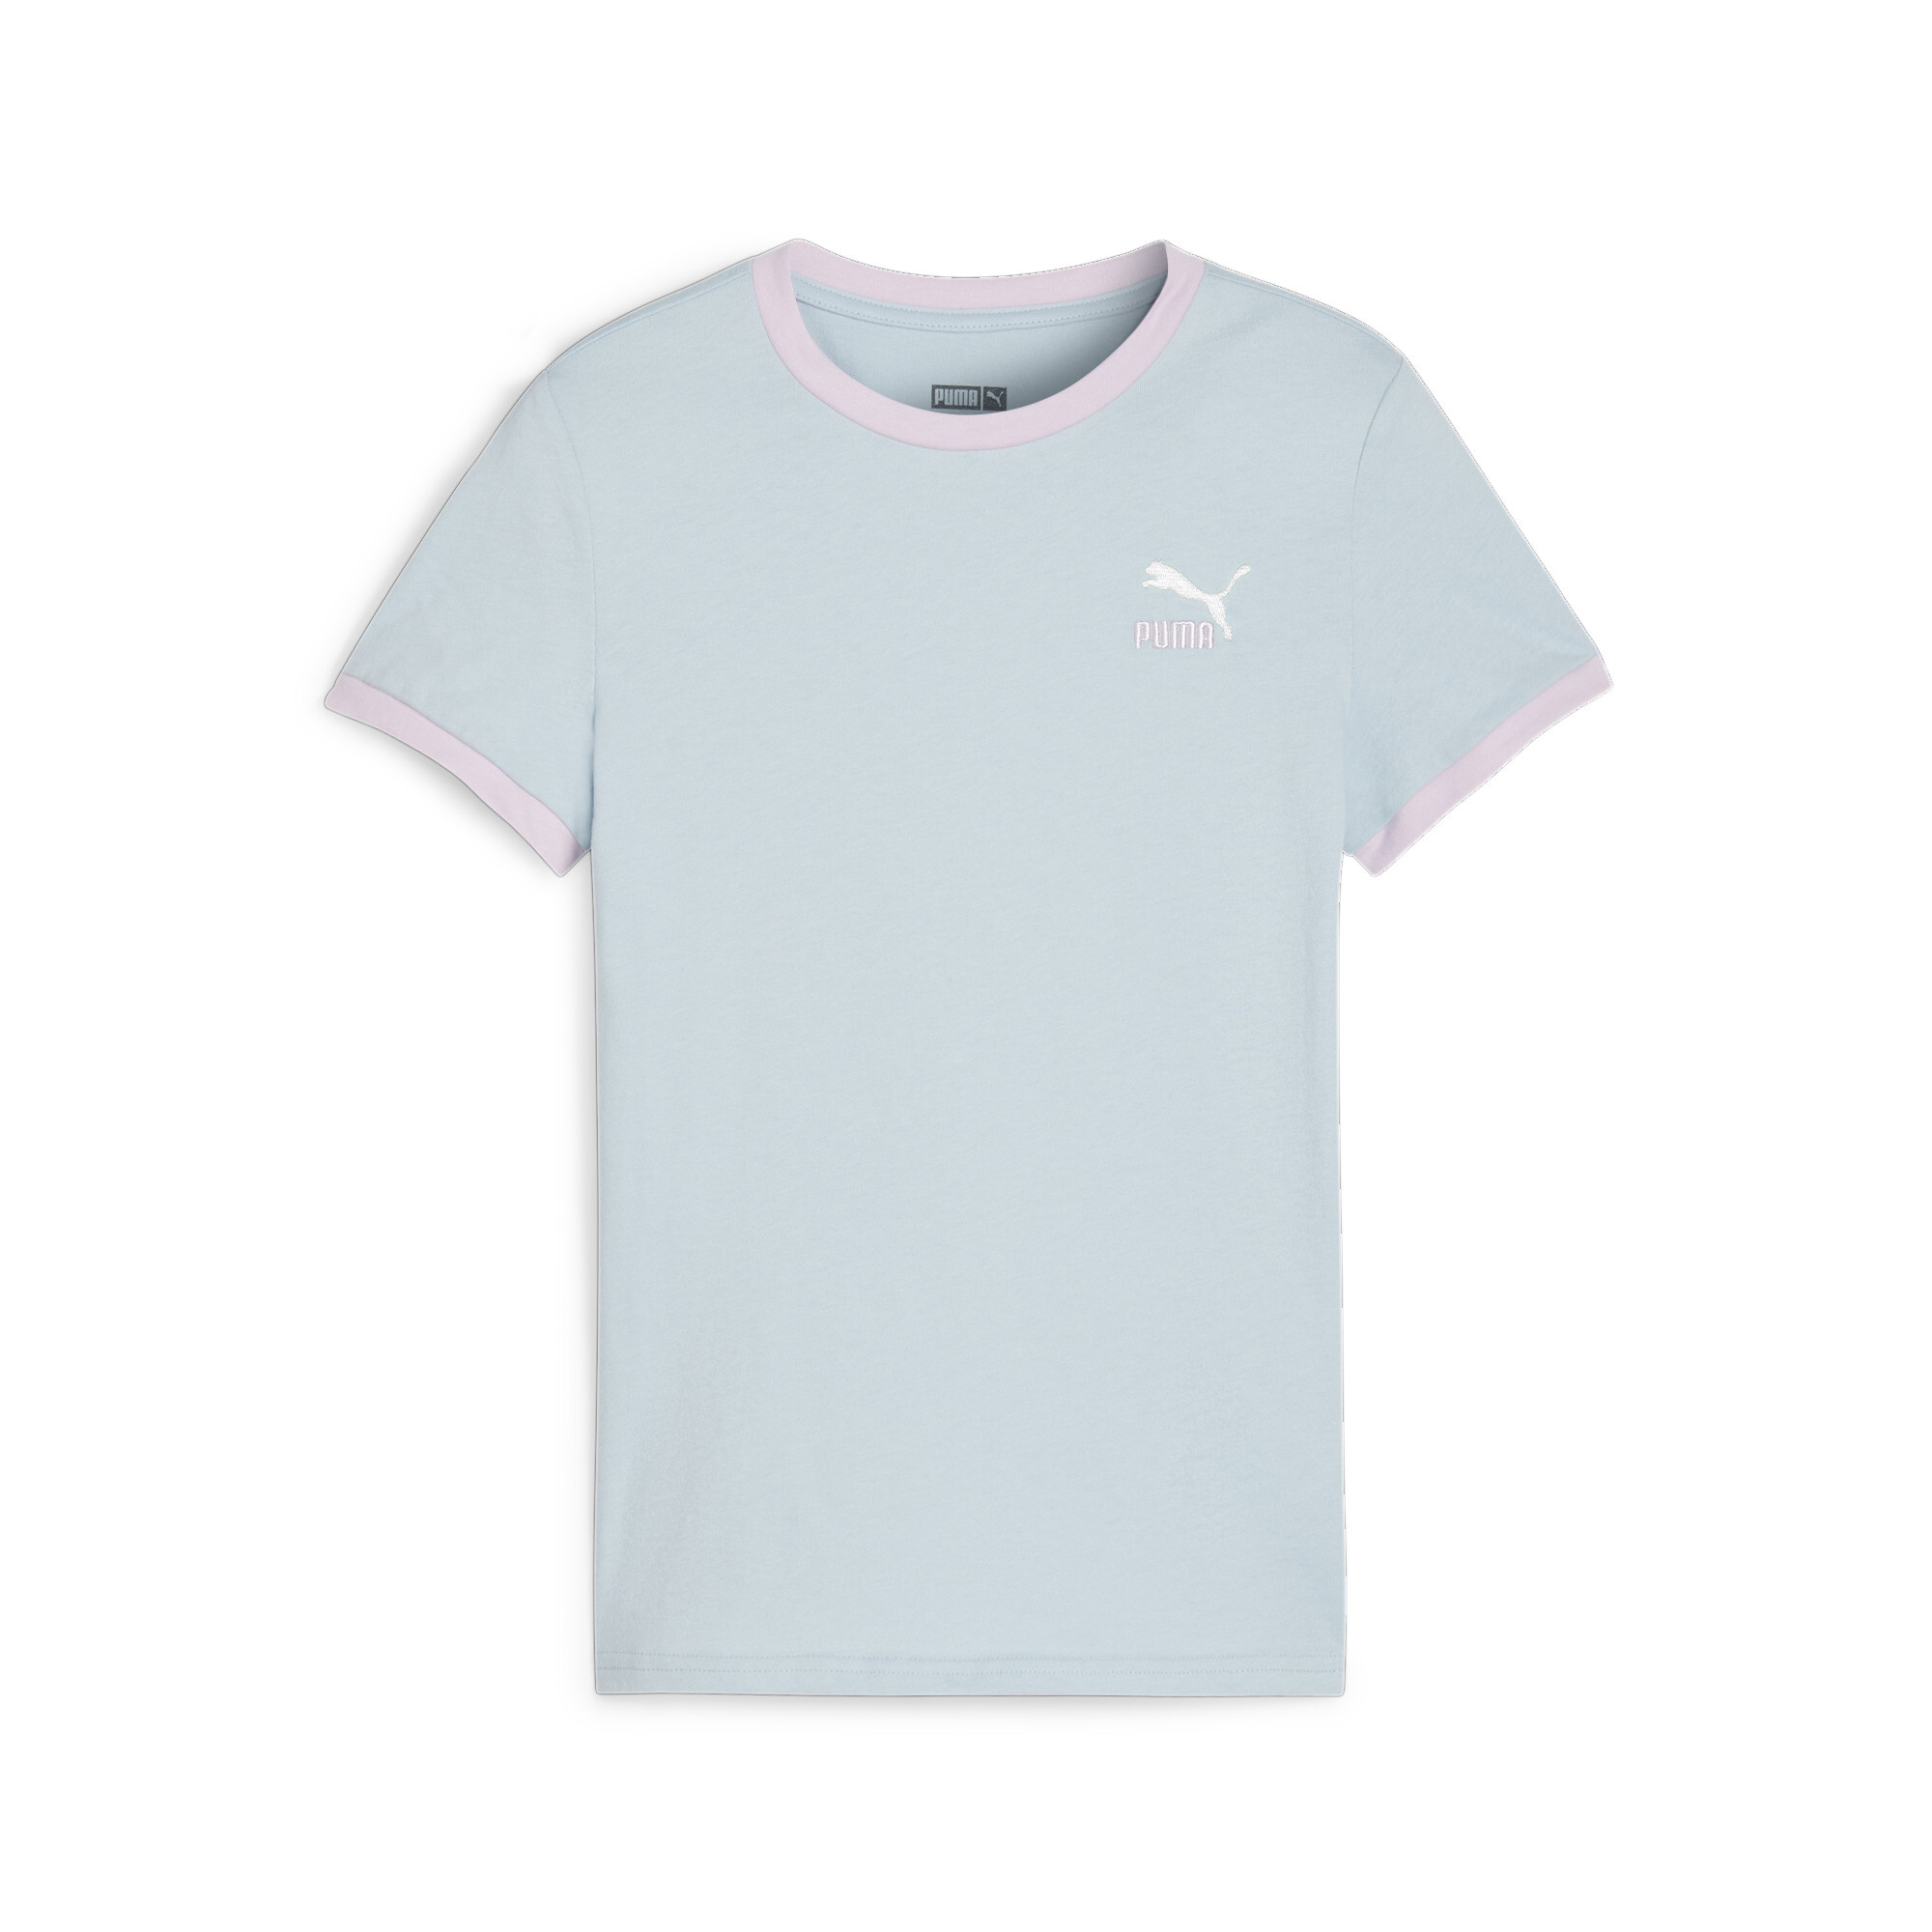 PUMA CLASSICS Match Point T-Shirt In Blue, Size 9-10 Youth